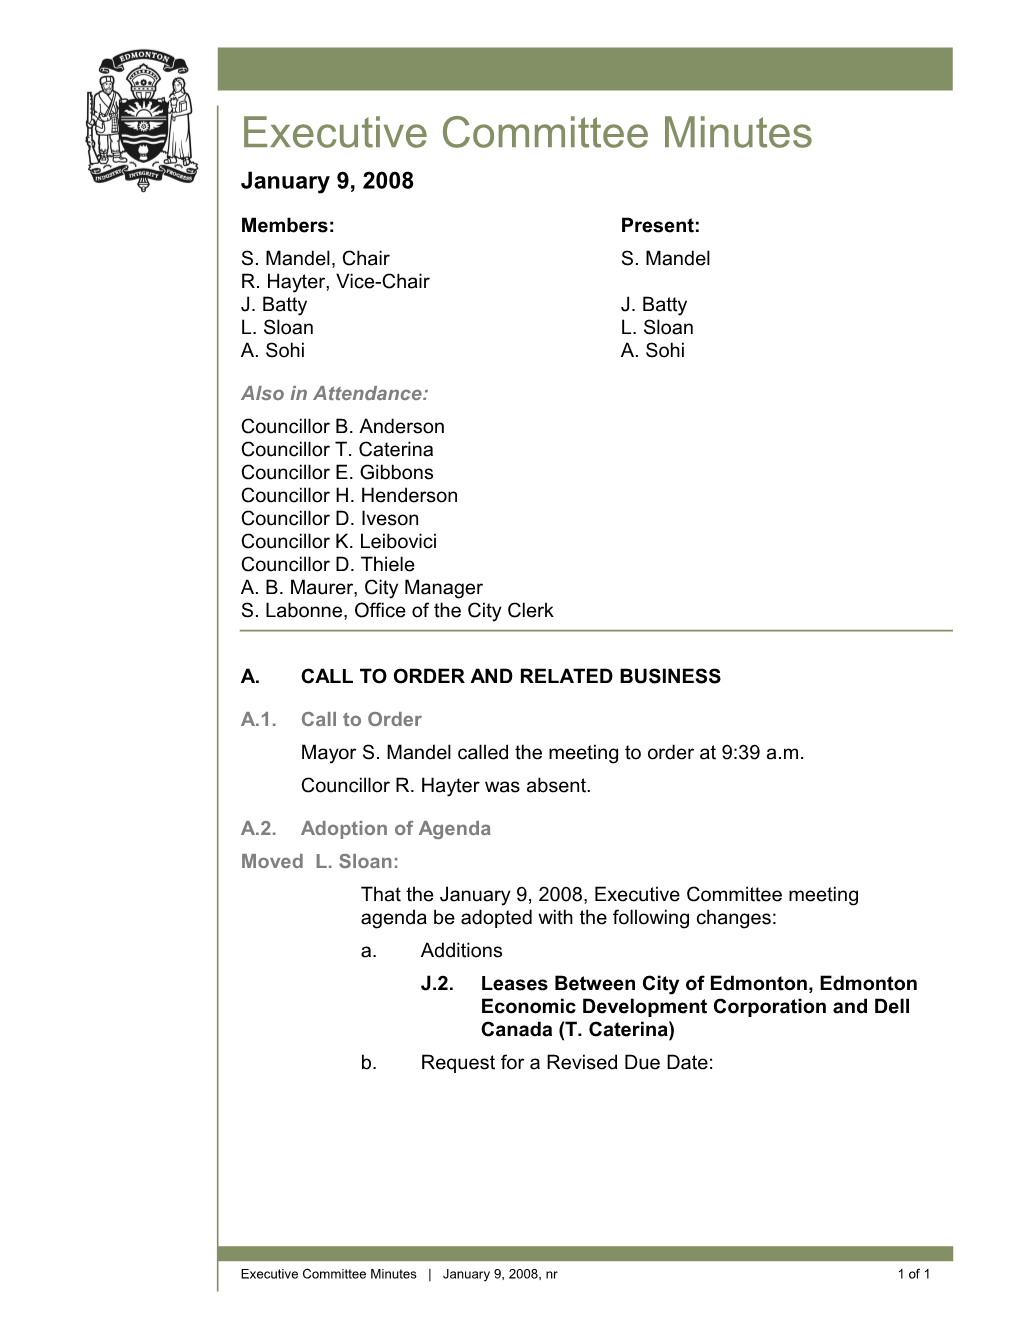 Minutes for Executive Committee January 9, 2008 Meeting